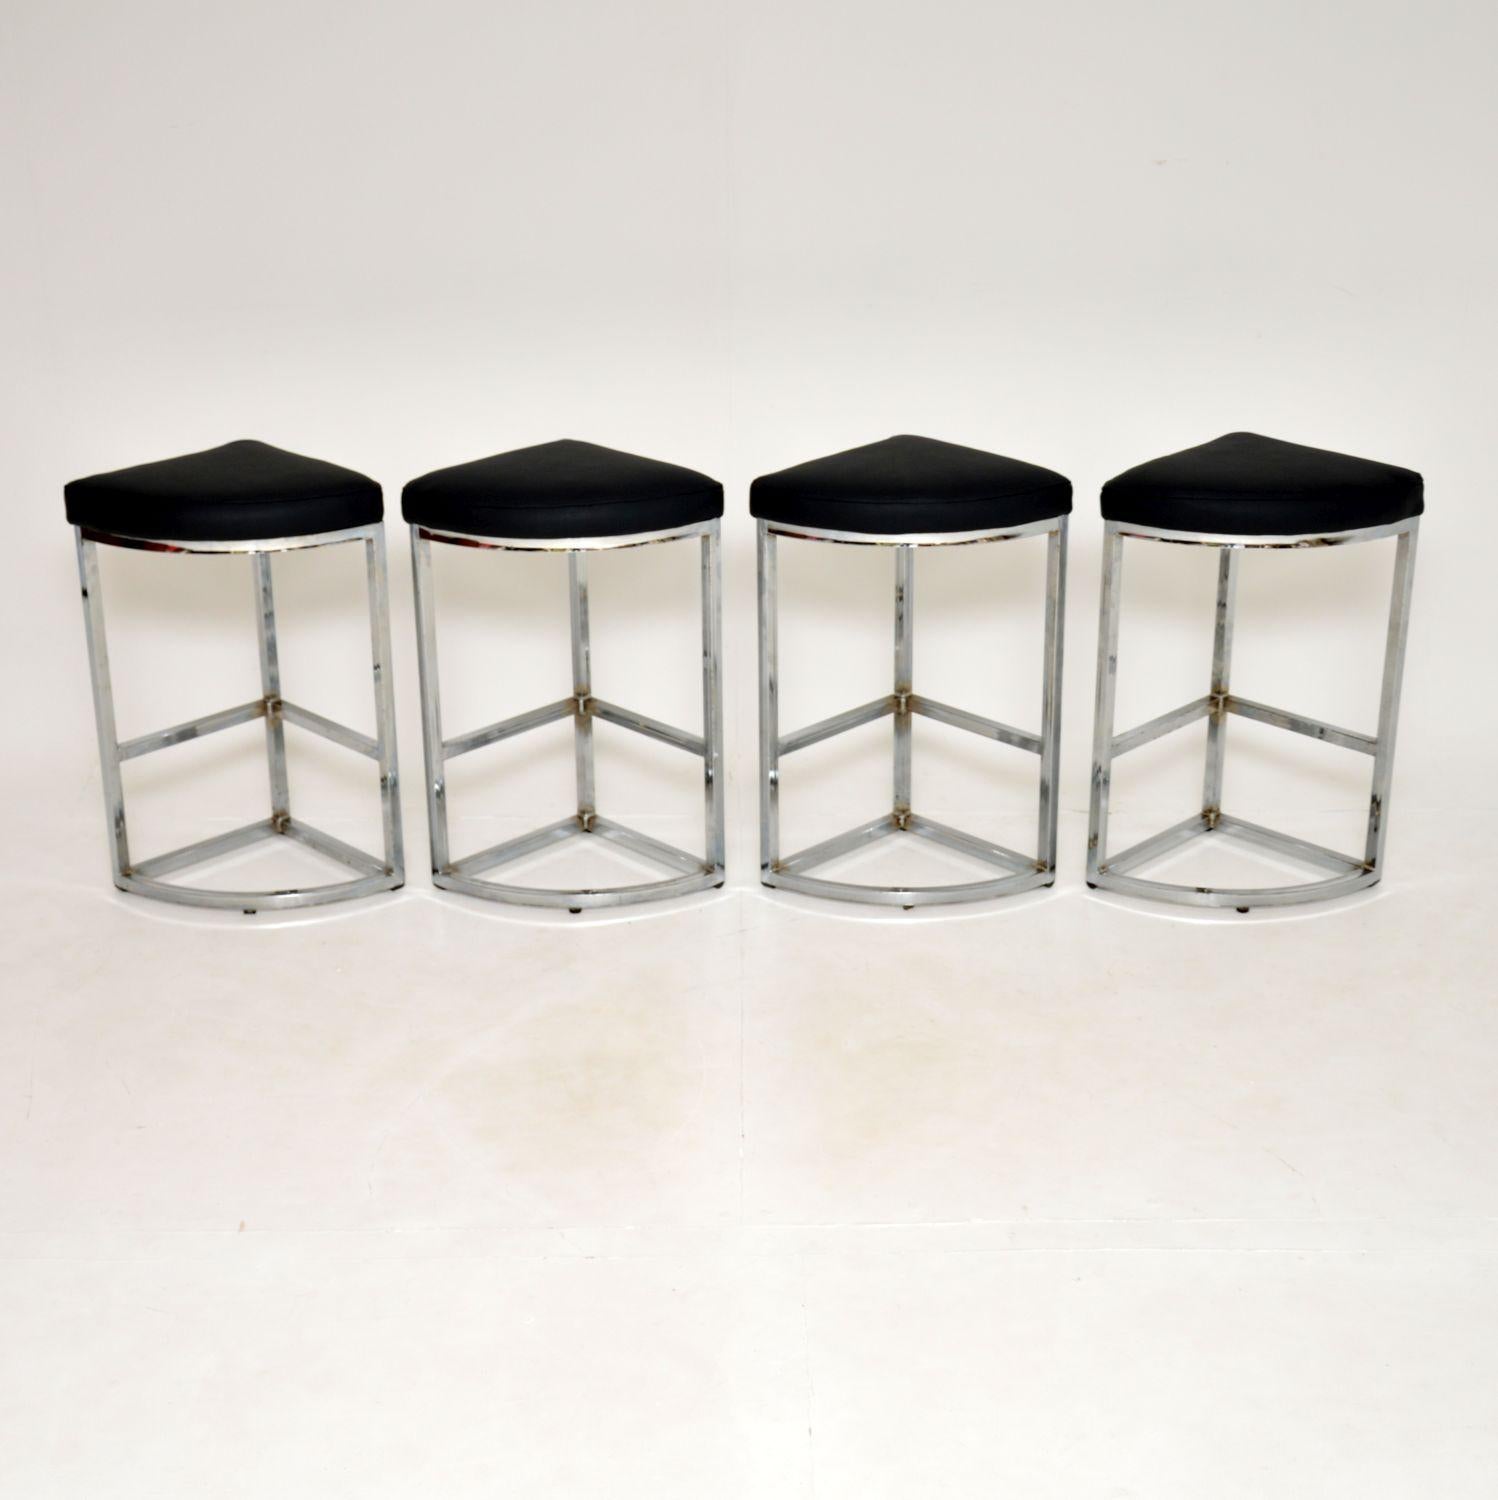 A beautiful set of four wedge shaped bar stools in chrome. These were made in France, they date from around the 1970’s.

They are beautifully made and have a great design, they can be pushed together to make a circular shape to fit around a tall